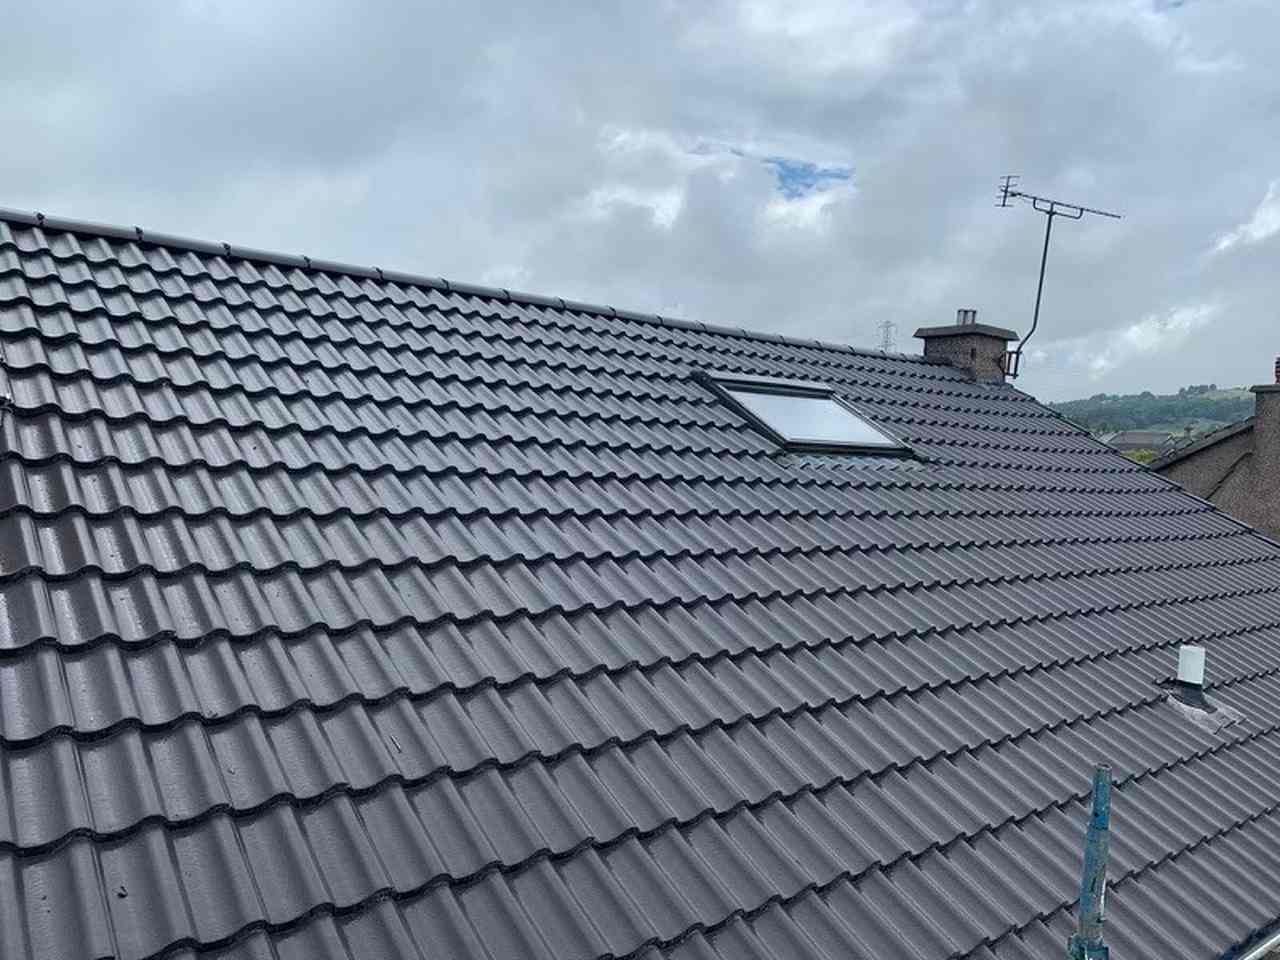 Tiled roof with window